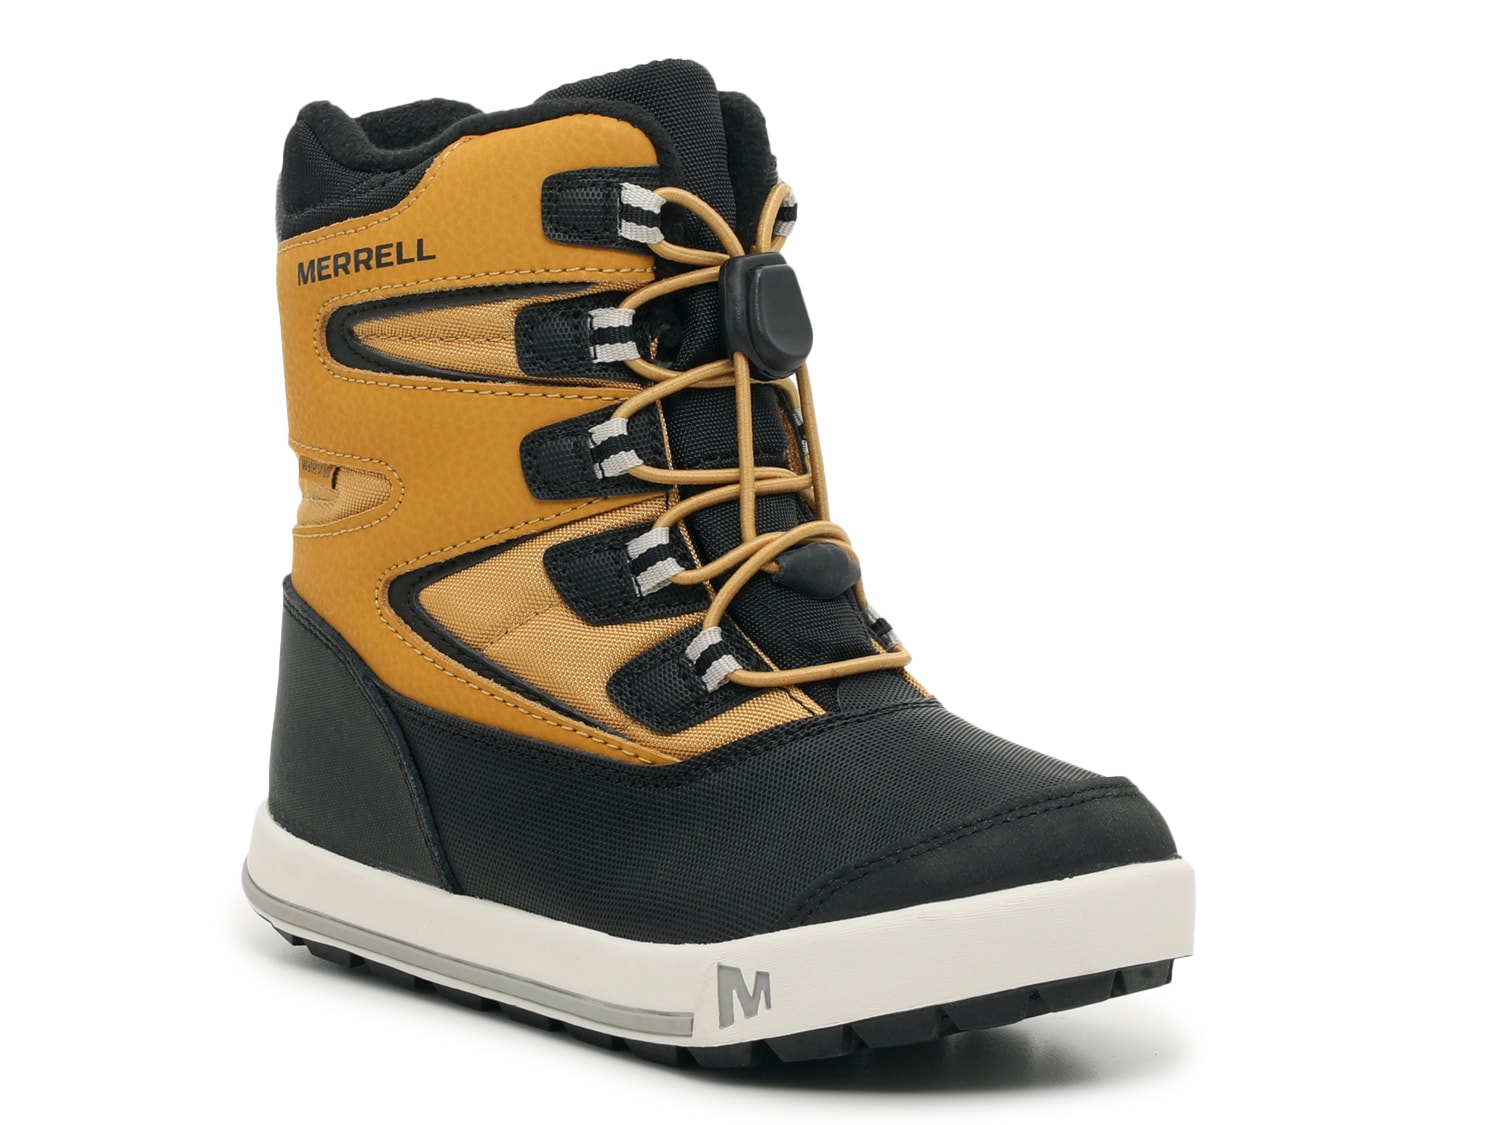 Merrell Snow Bank 3 Snow Boot - Kids' - Free Shipping | DSW